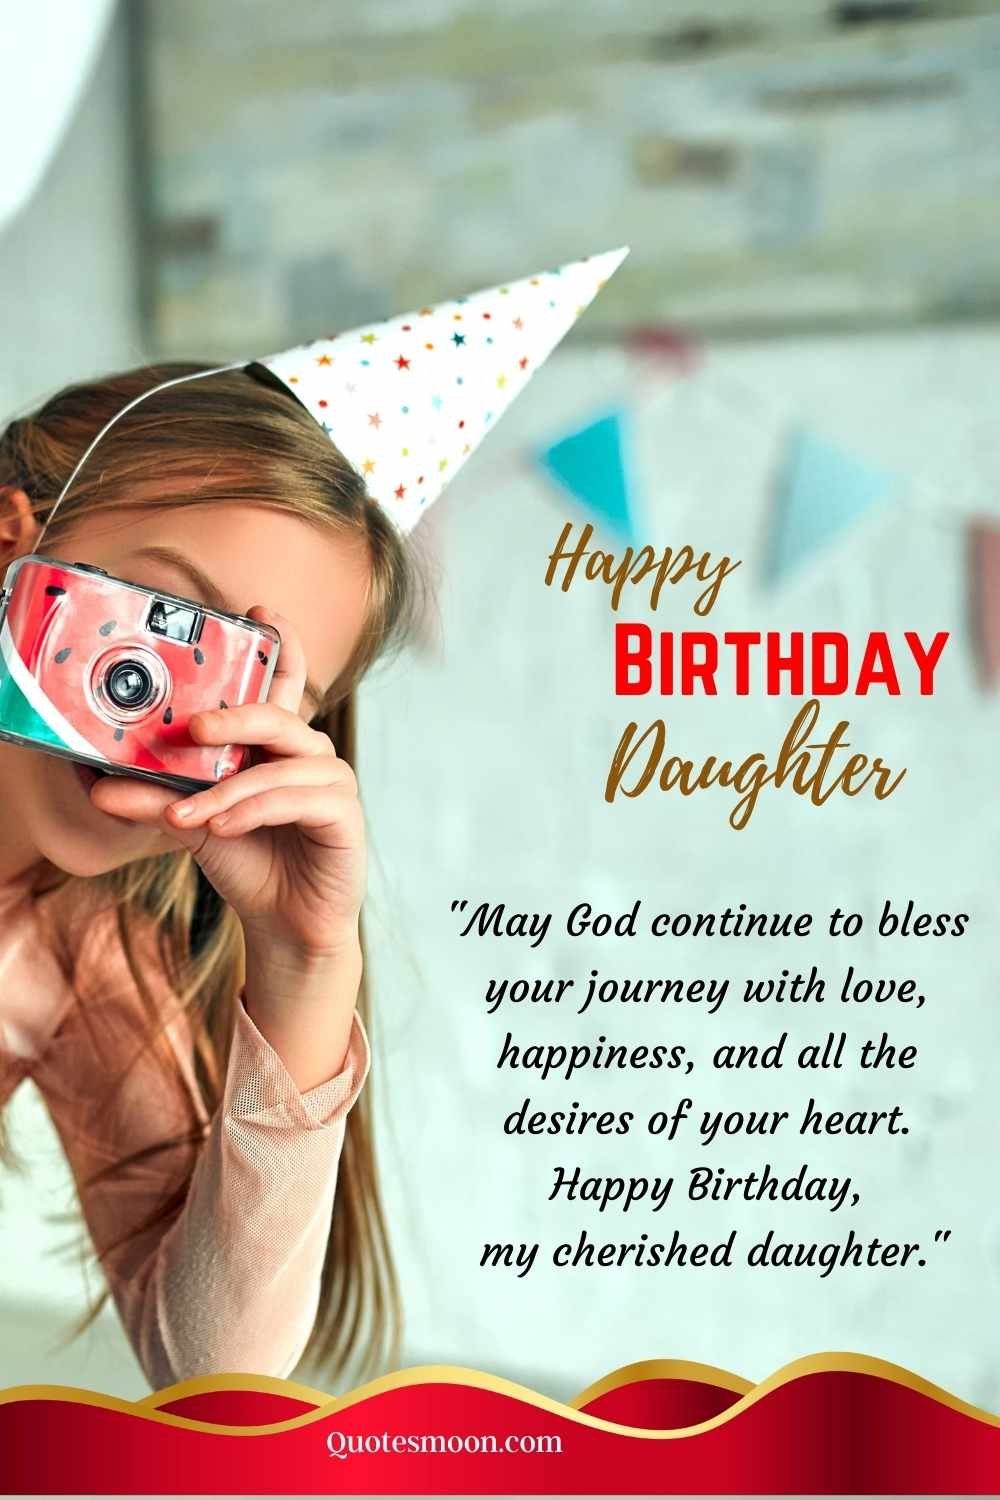 daughter birthday wishes from mom and dad images new